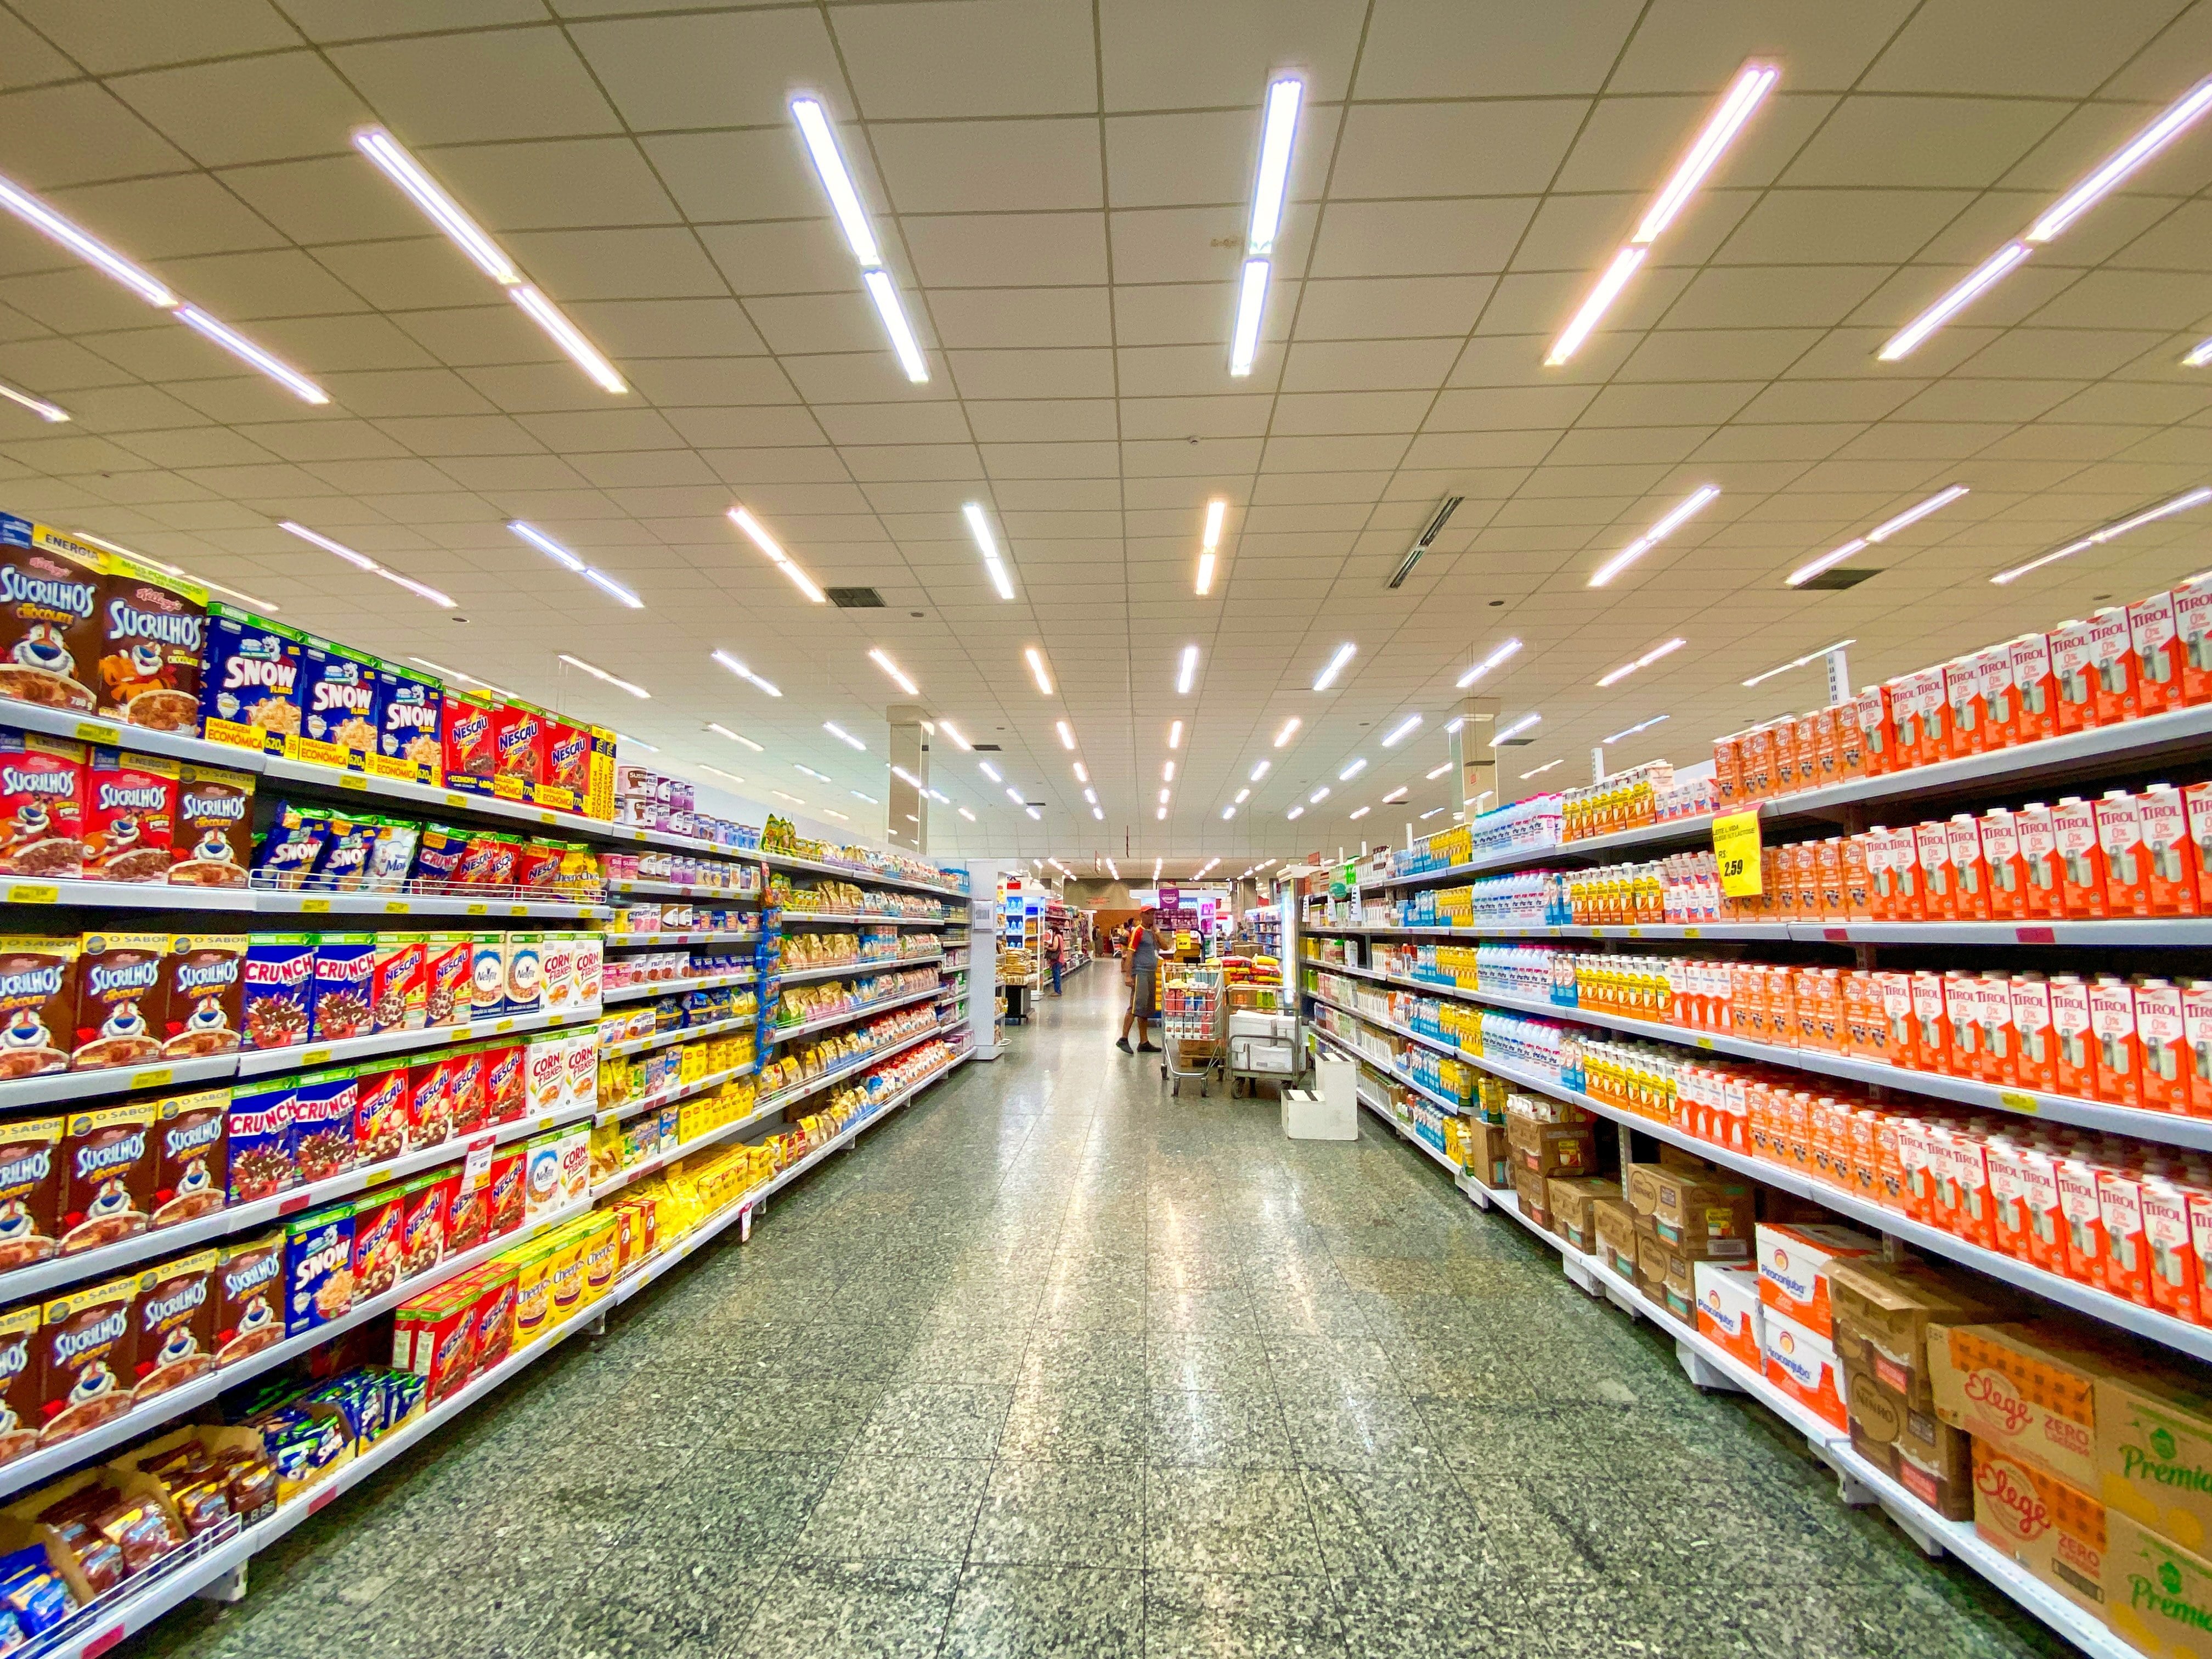 Food aisles and customer can be seen inside of a grocery store | Photo: Unsplash/Nathália Rosa